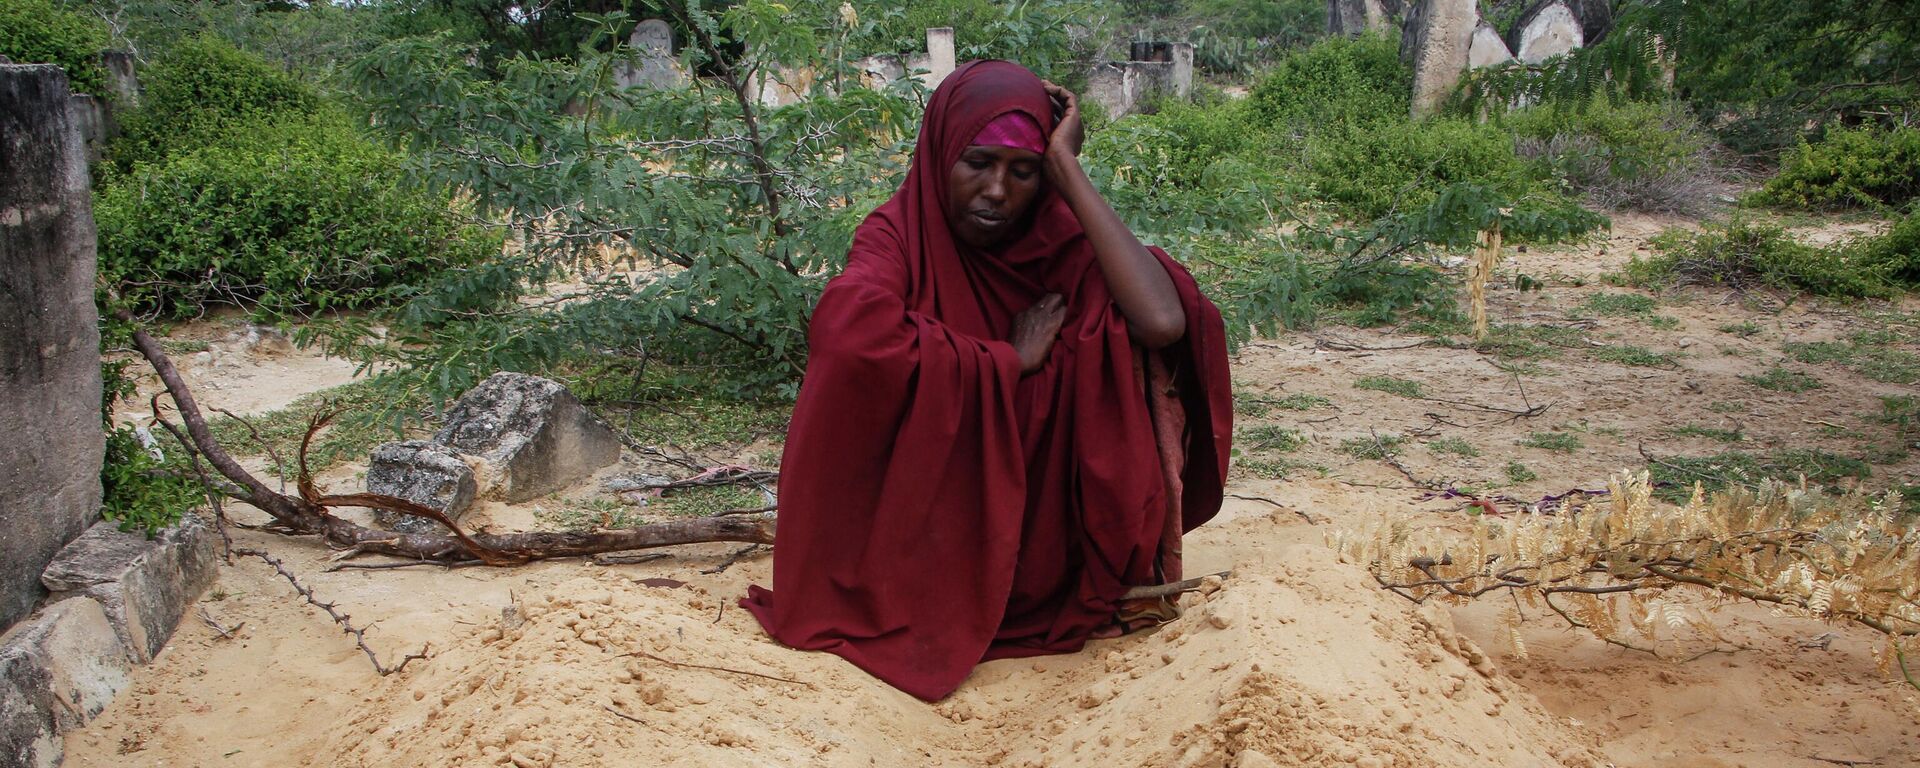 Fatuma Abdi Aliyow sits by the graves of her two sons who died of malnutrition-related diseases last week, at a camp for the displaced on the outskirts of Mogadishu, Somalia, Sept. 3, 2022. - Sputnik International, 1920, 04.11.2022